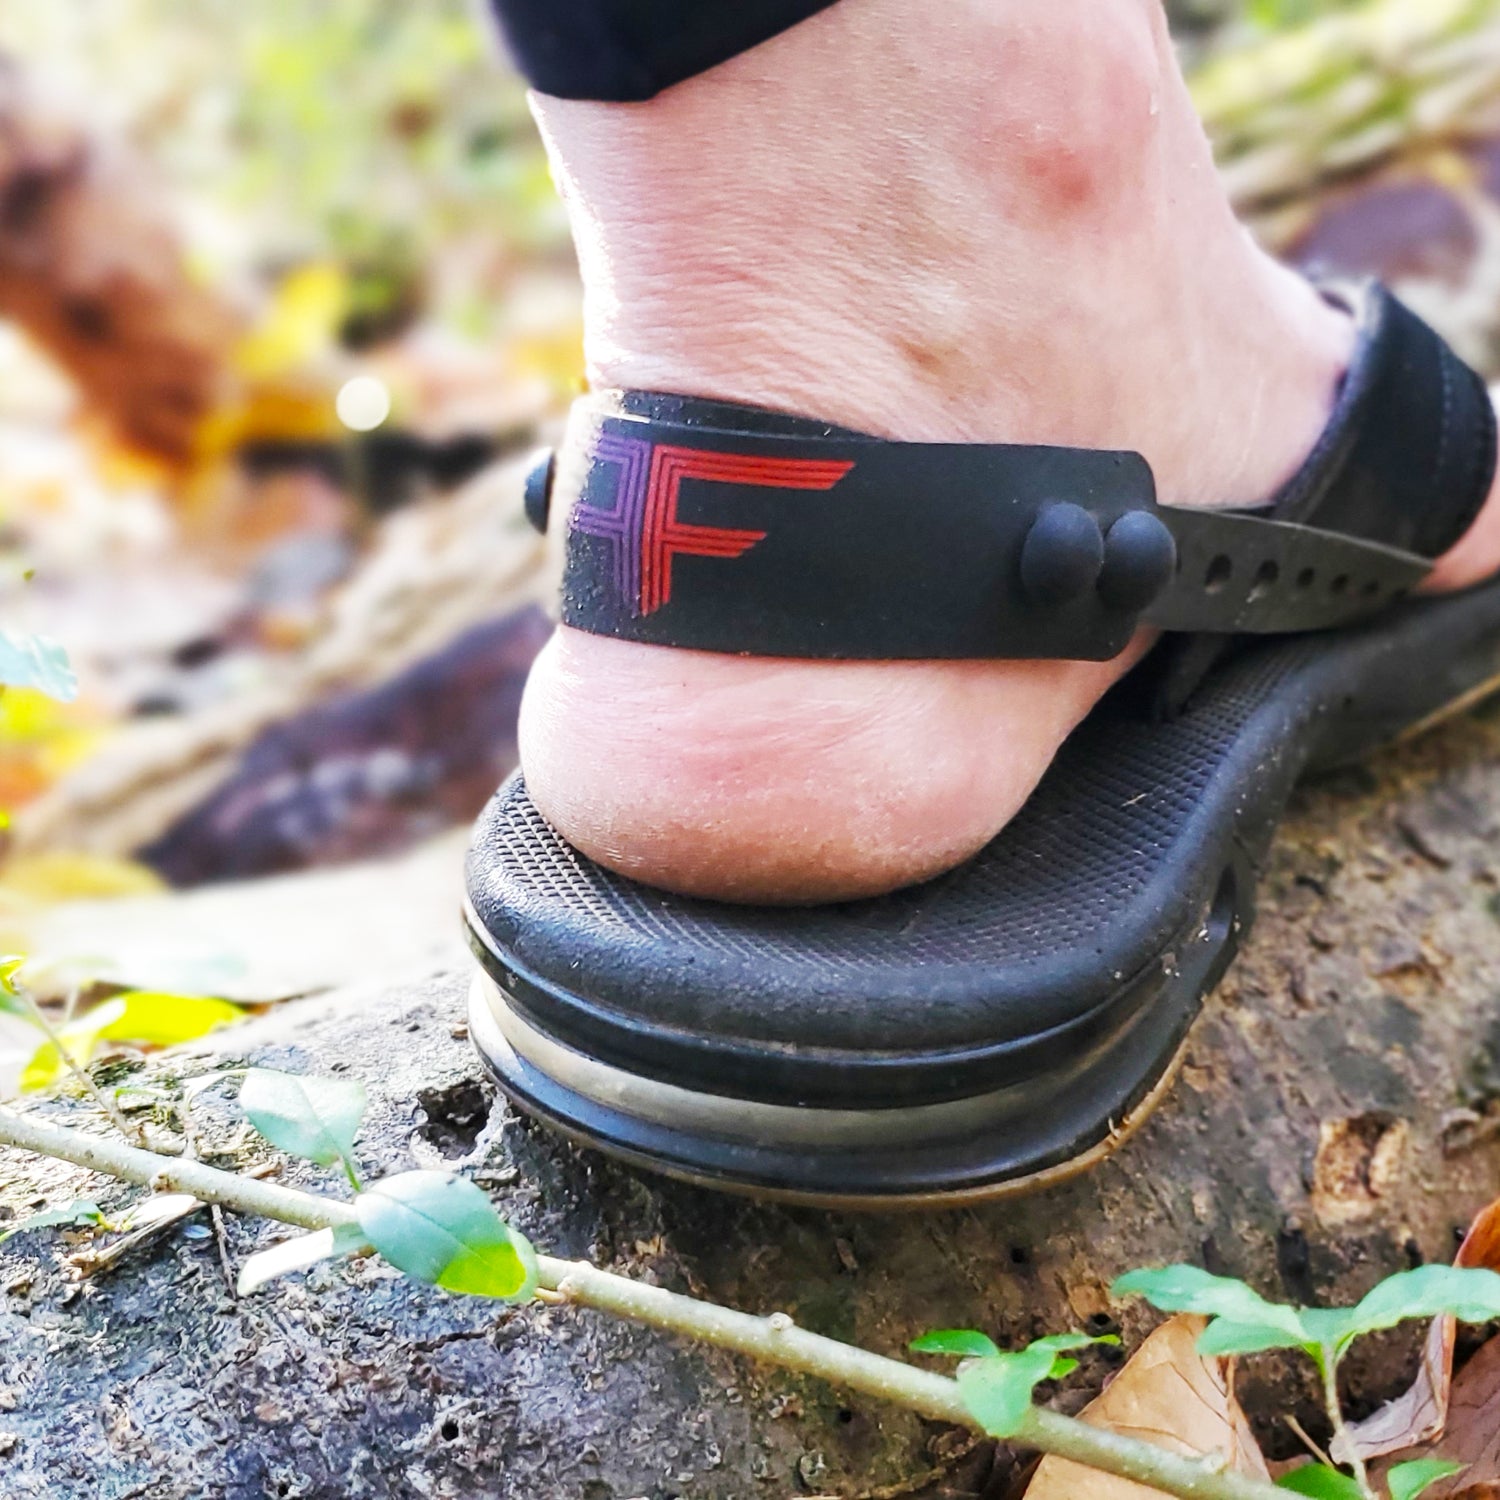 Stepping on log while hiking, wearing the patented Flip Flap. Security never felt so good.